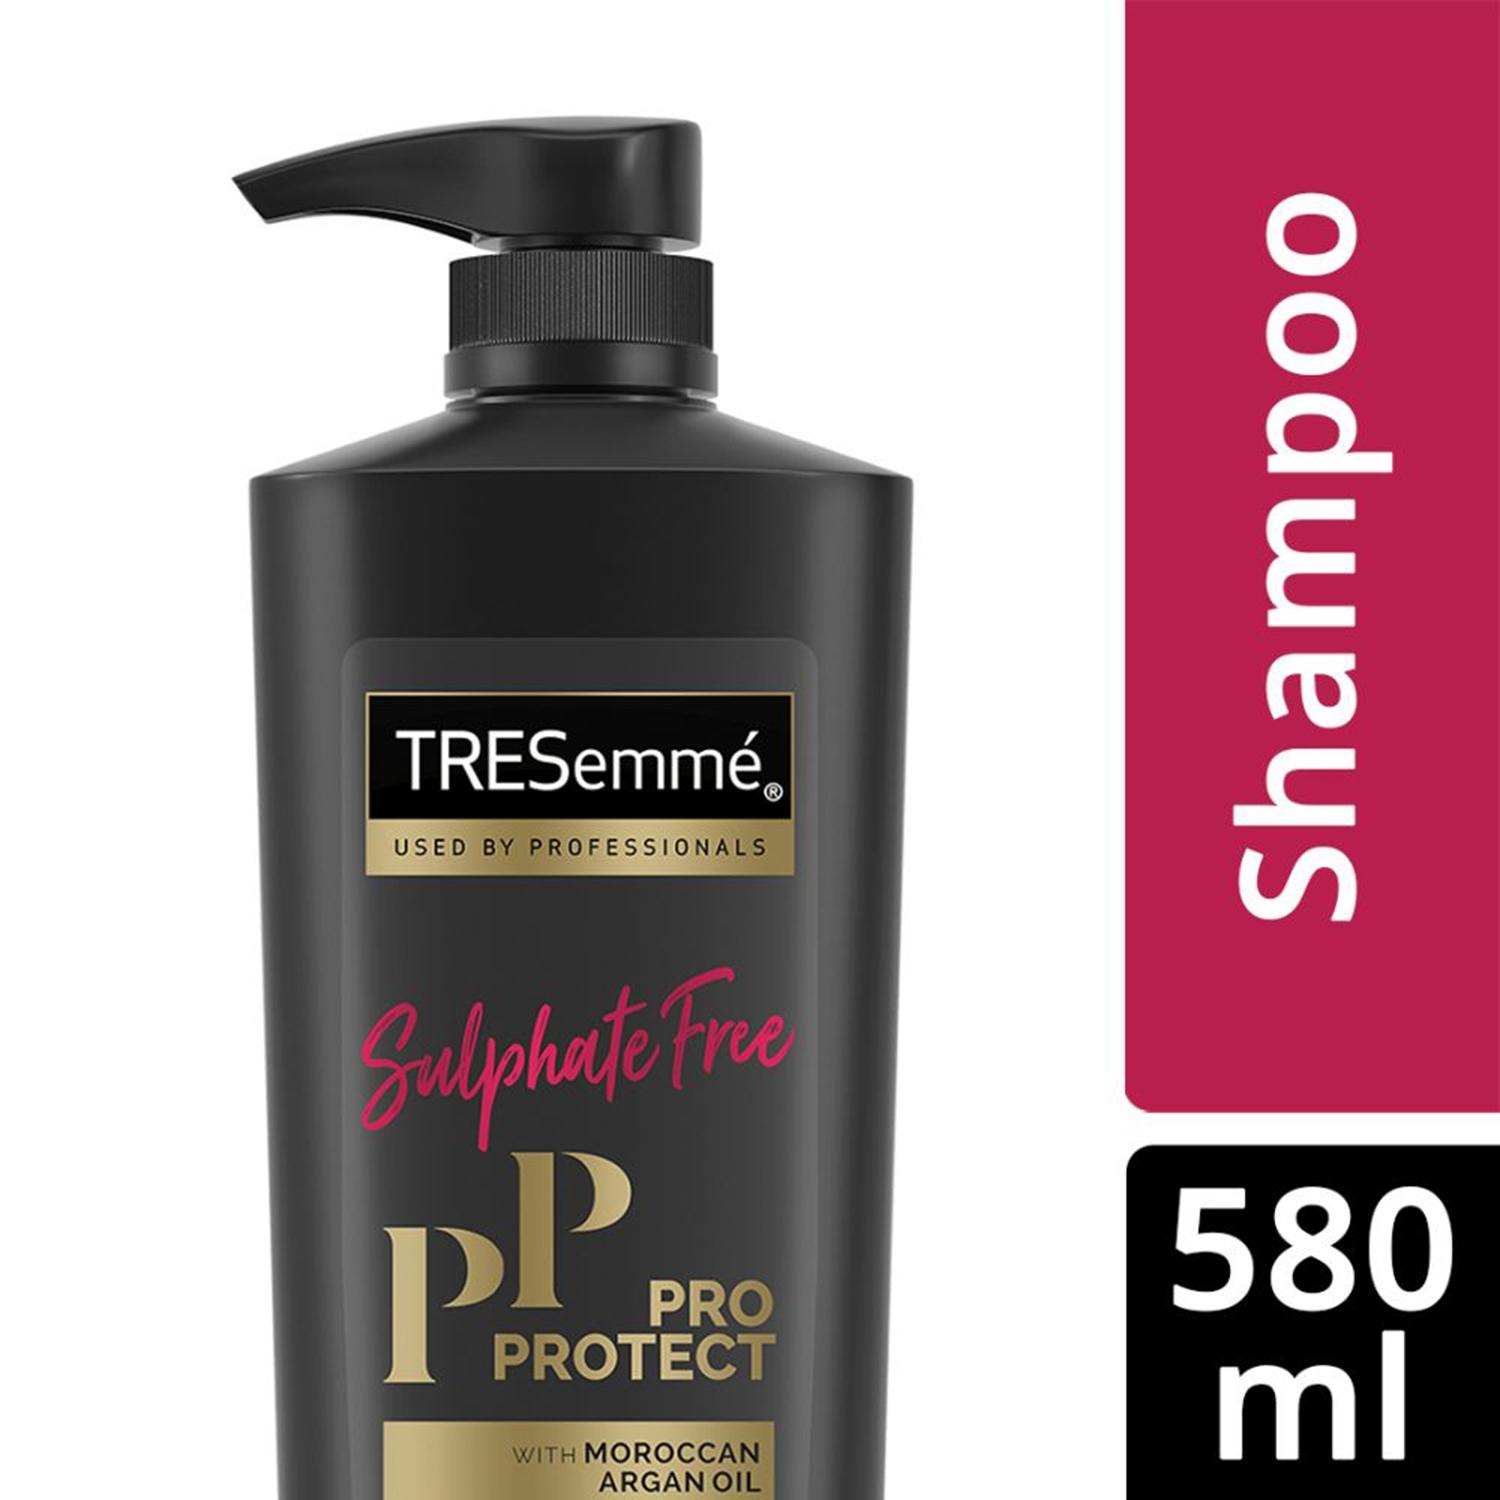 tresemme pro protect sulphate free shampoo - (580ml)